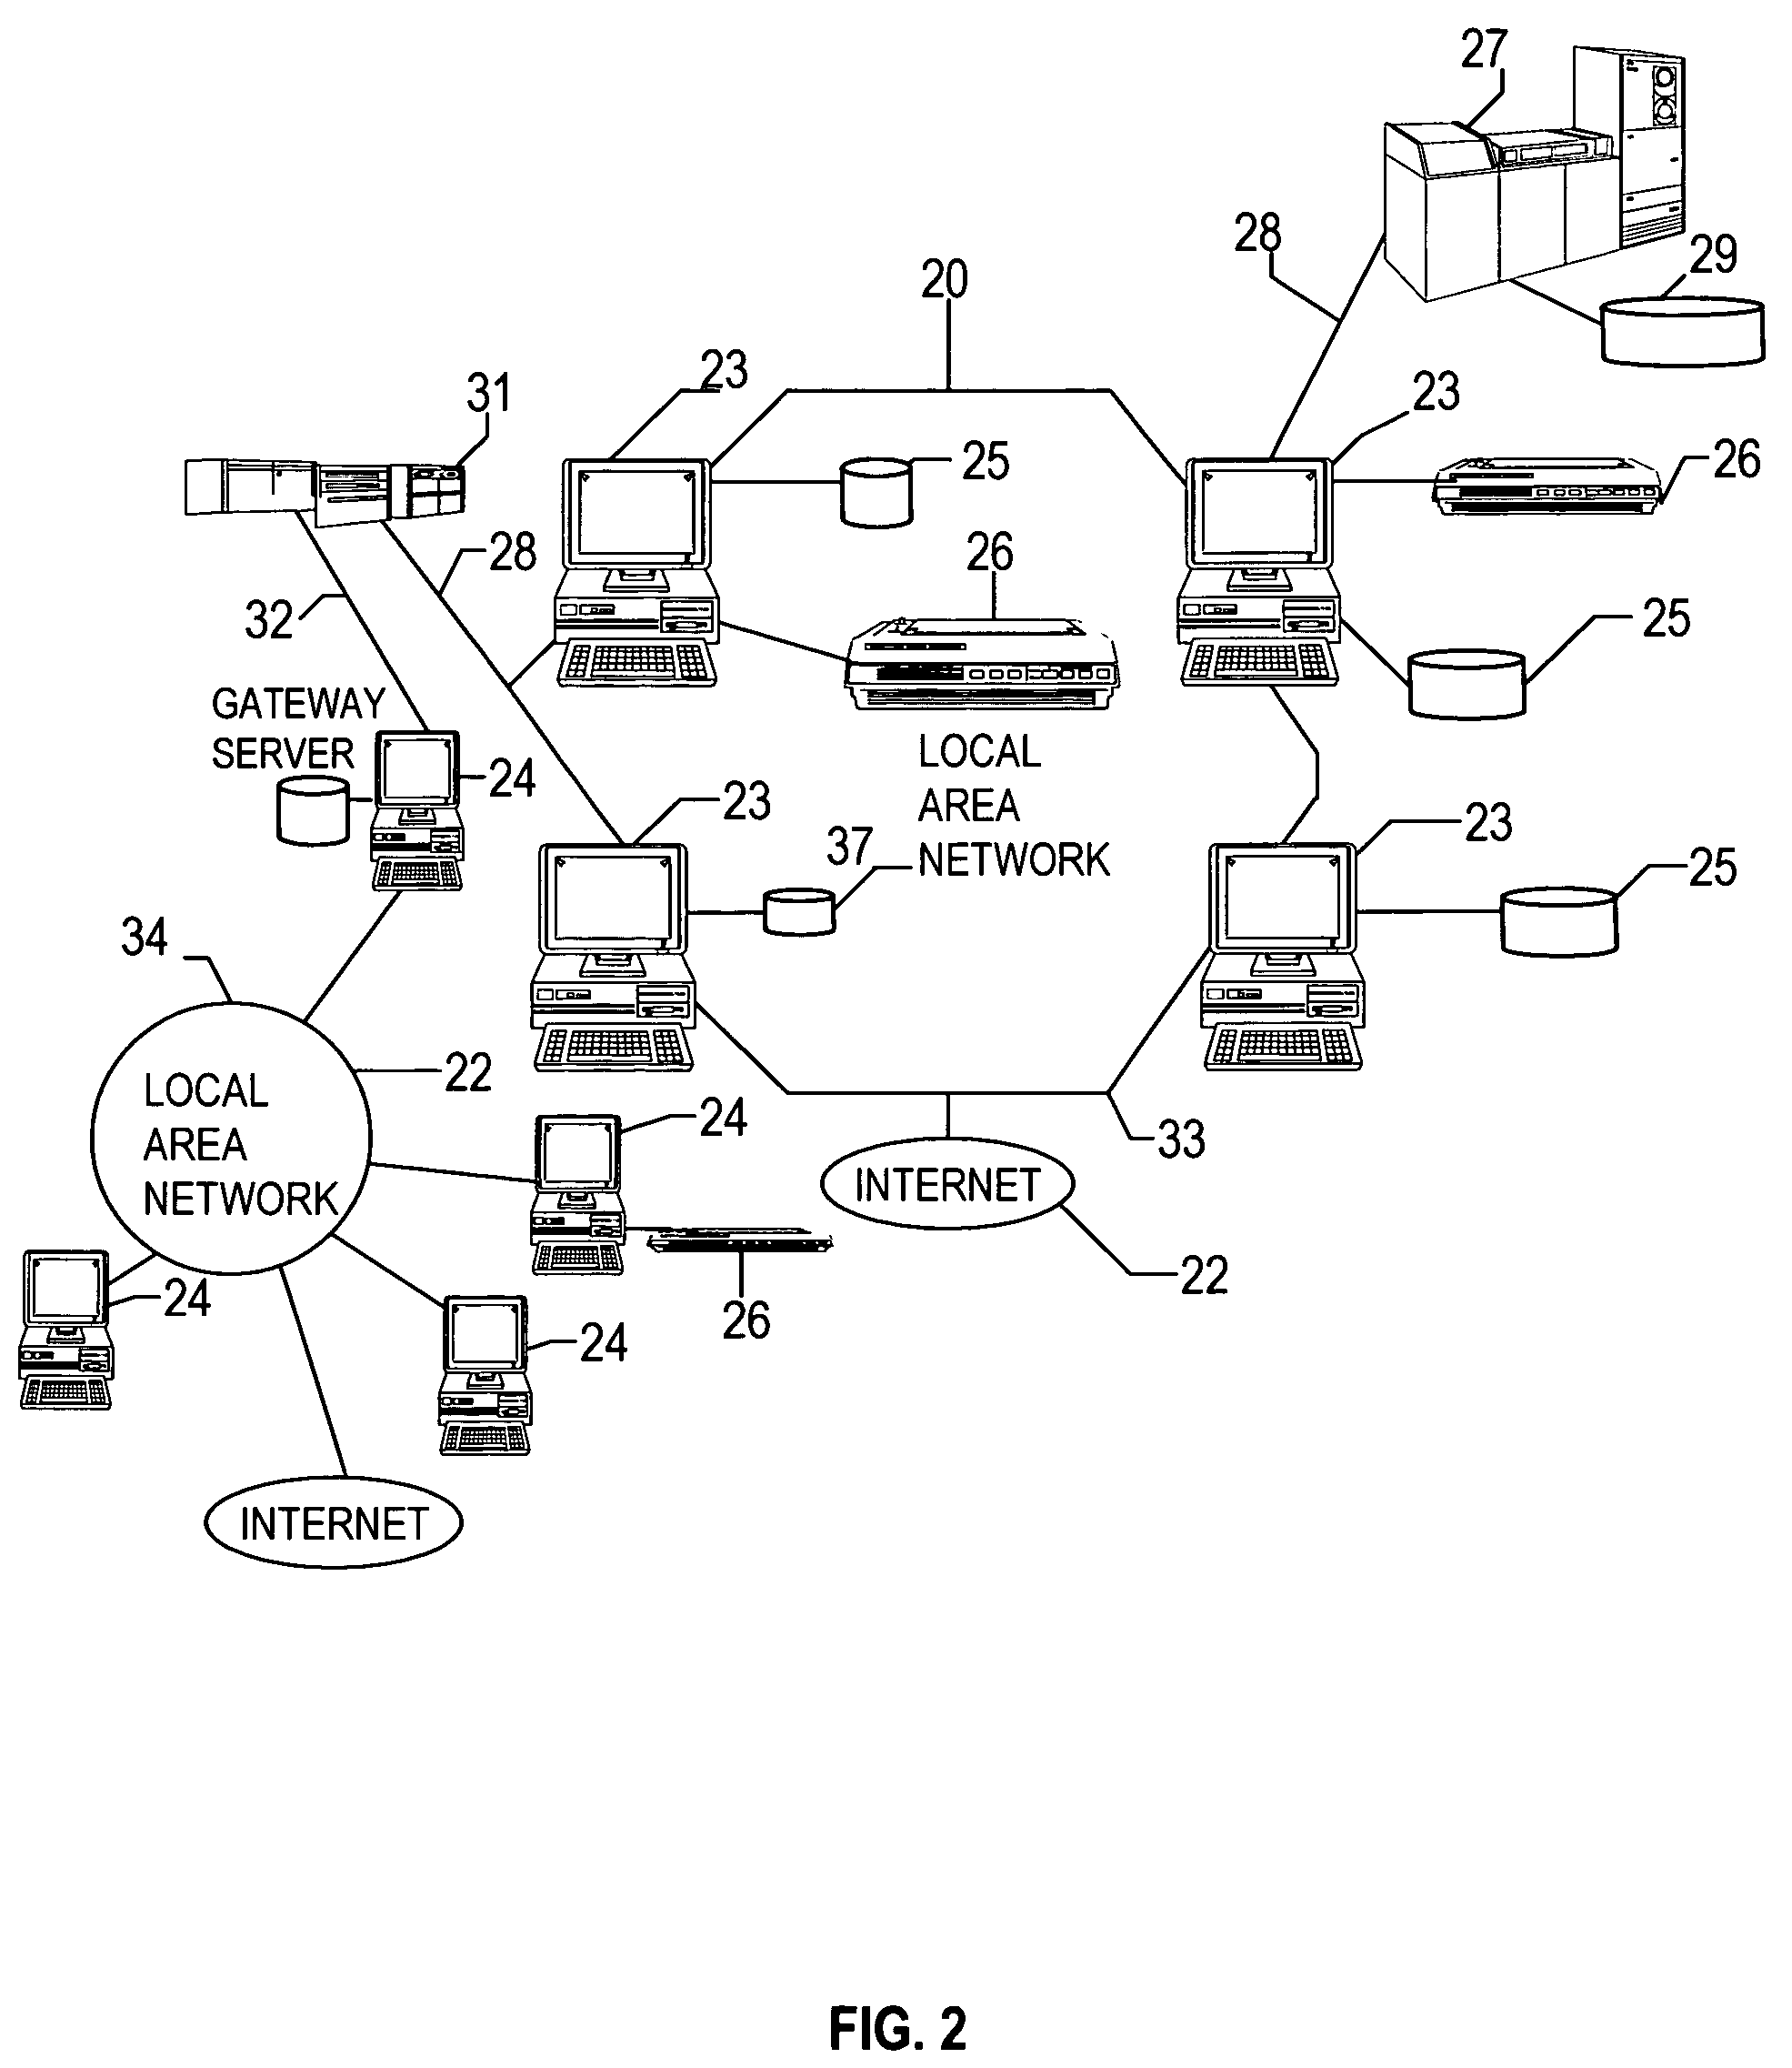 Method for managing electronic mail receipts using audio-visual notification enhancements